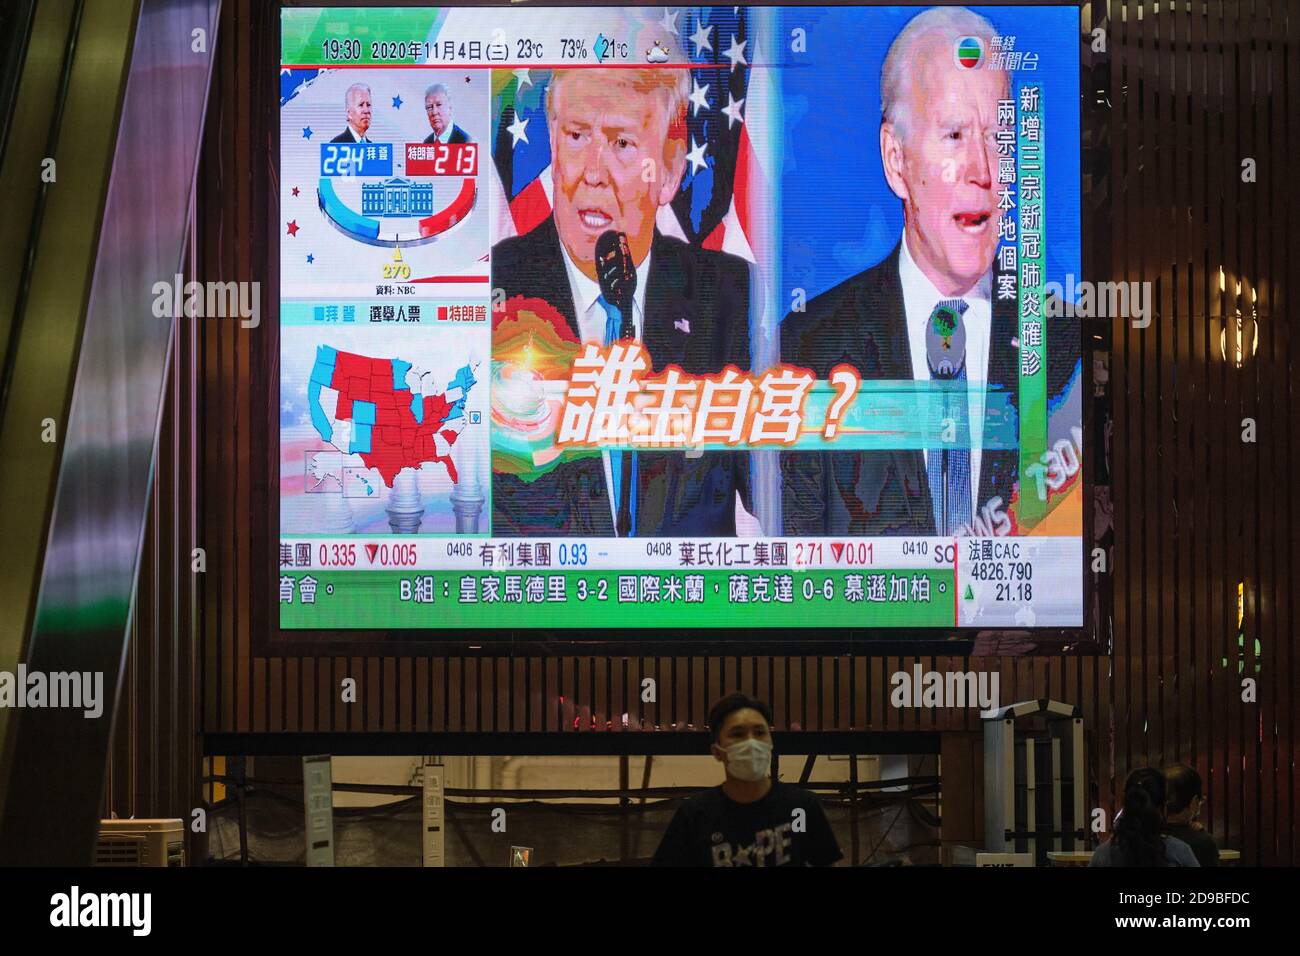 A public screen on Hong Kong street broadcasts presidential candidates Joe Biden and Donald Trump during a live news report of the US Presidential elections. Stock Photo